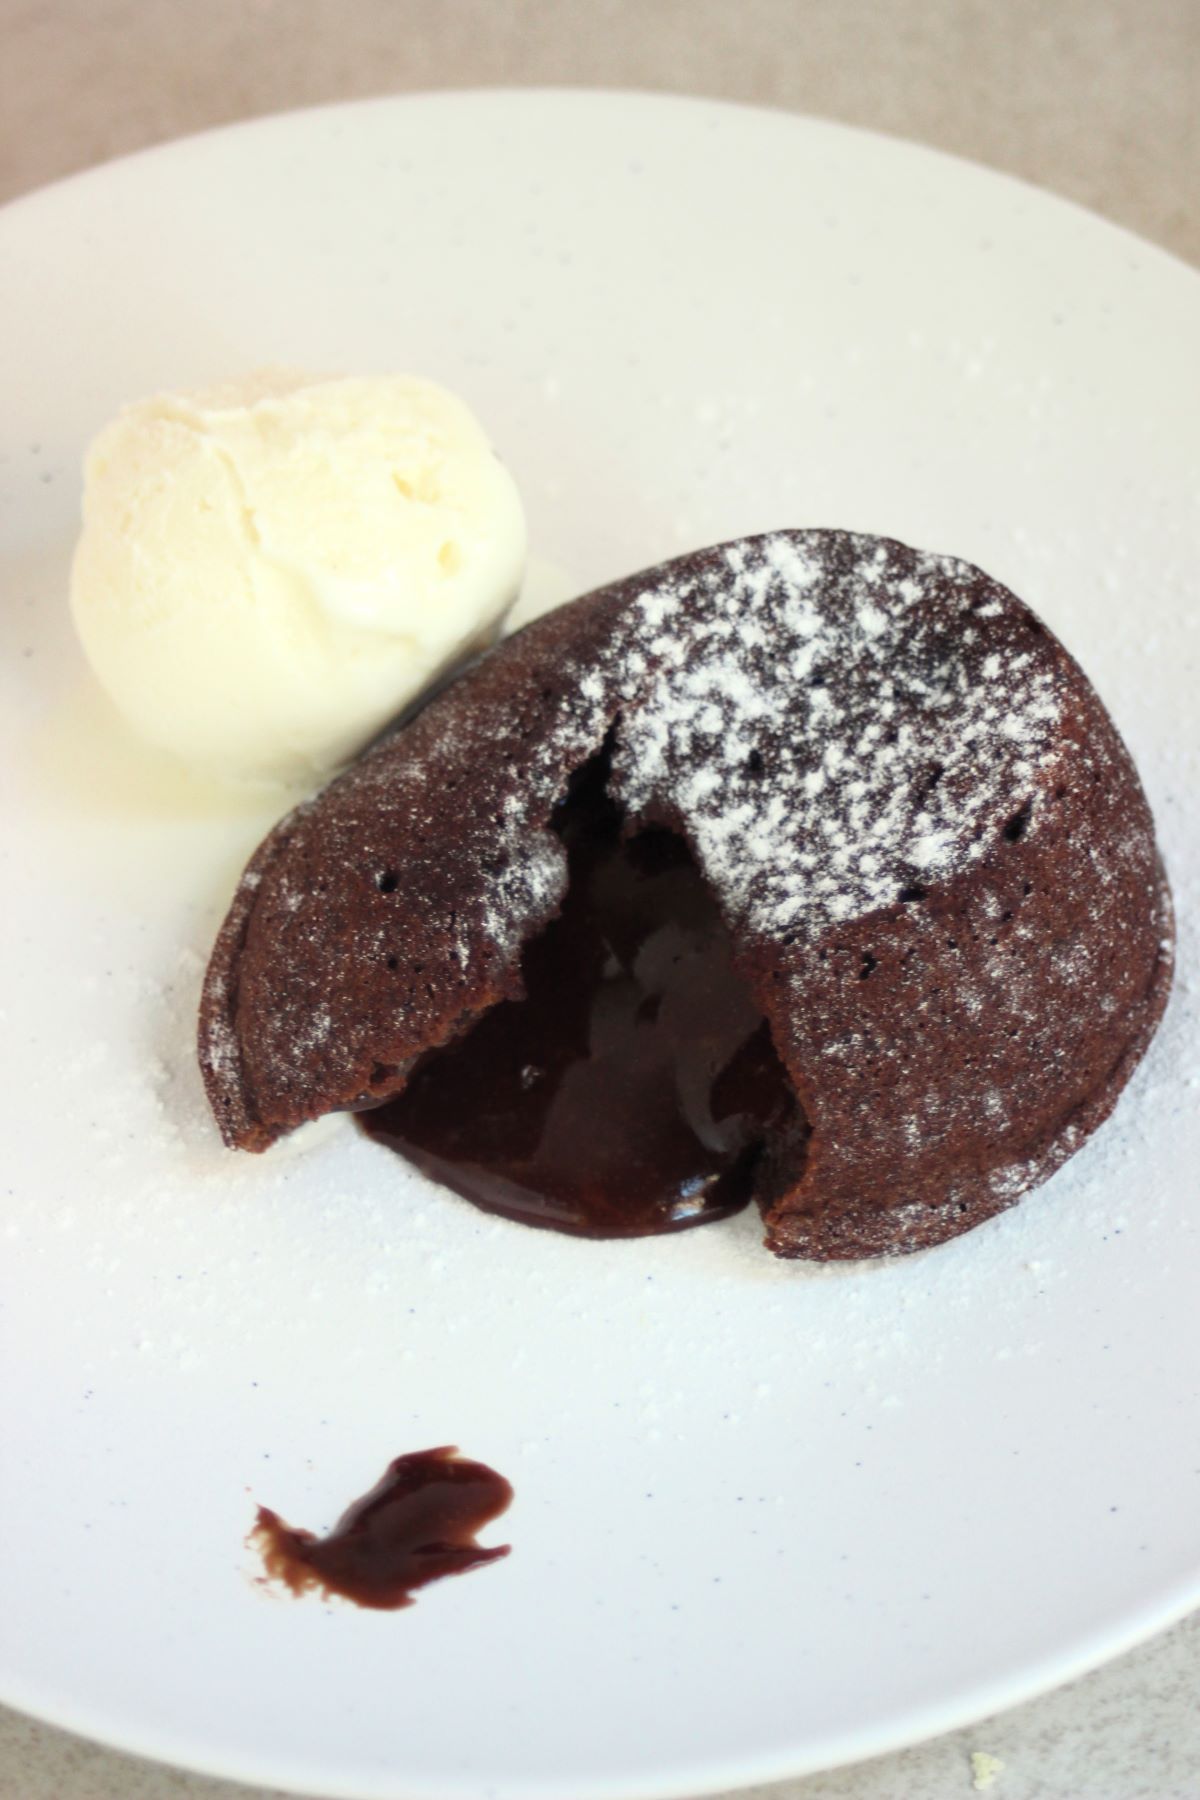 Molten lava cake, melted chocolate coming out of it, and a scoop of ice cream on a white plate.